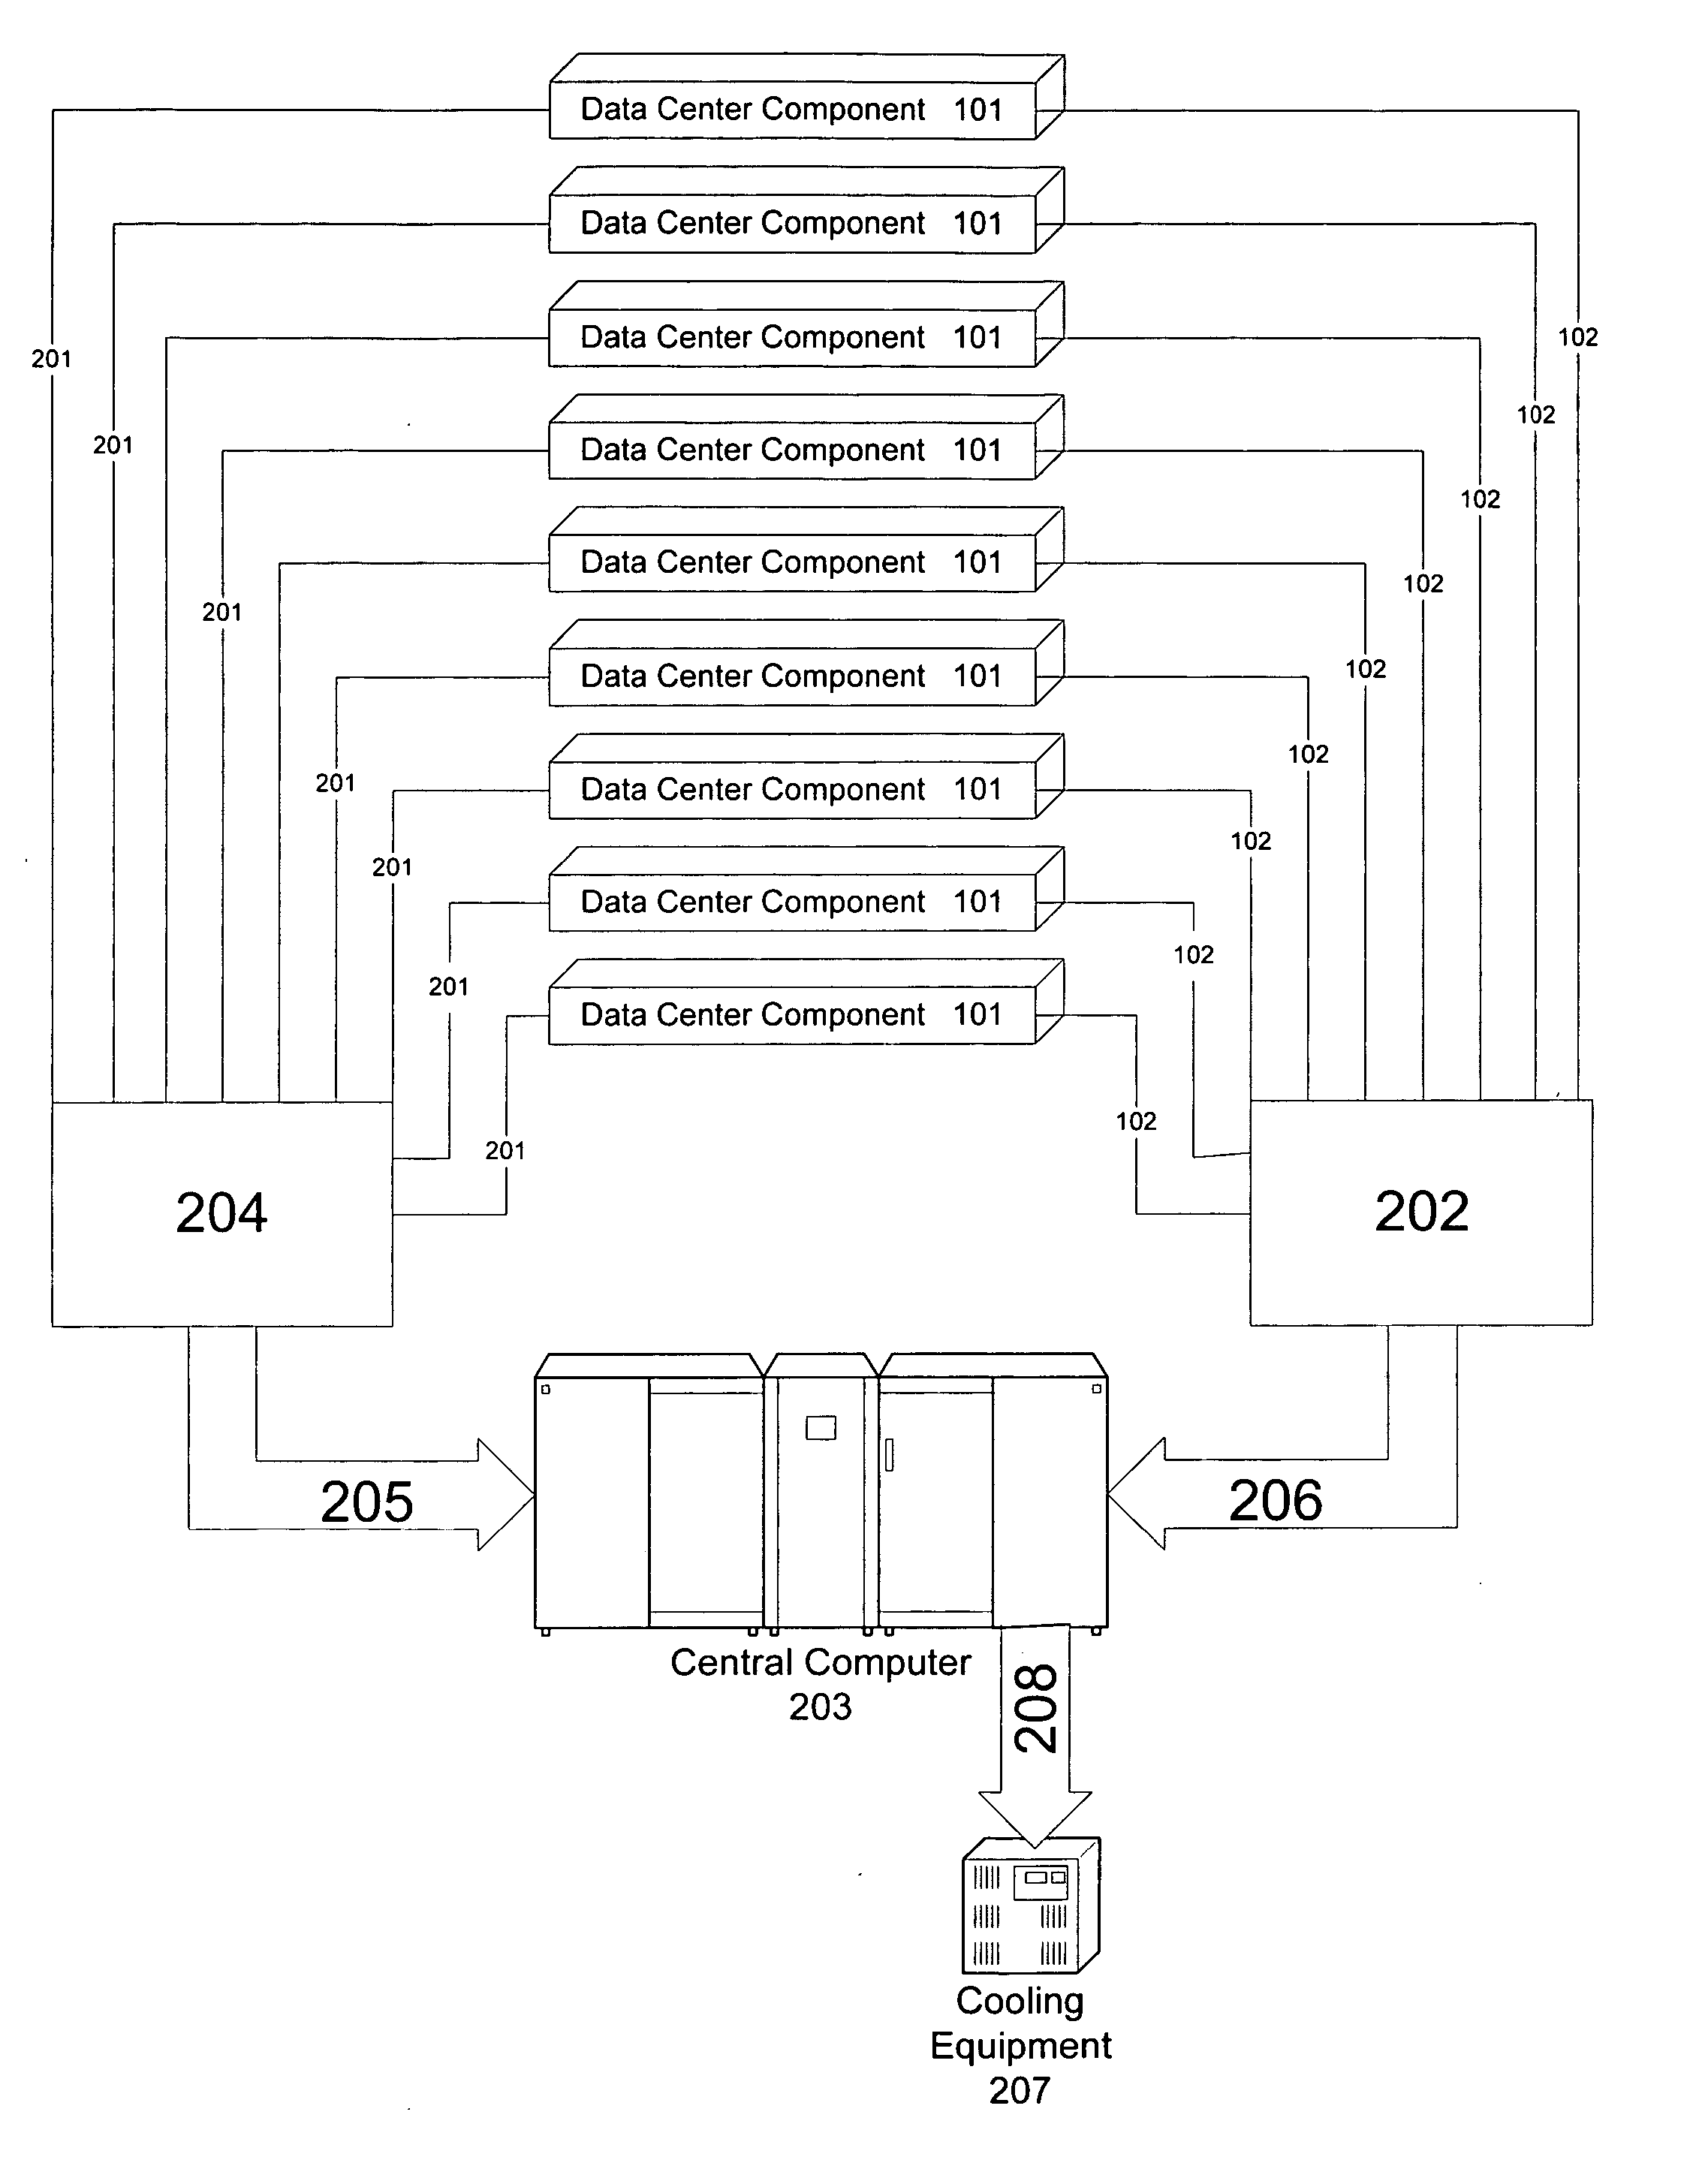 Method for dynamically reprovisioning applications and other server resources in a computer center in response to power and heat dissipation requirements